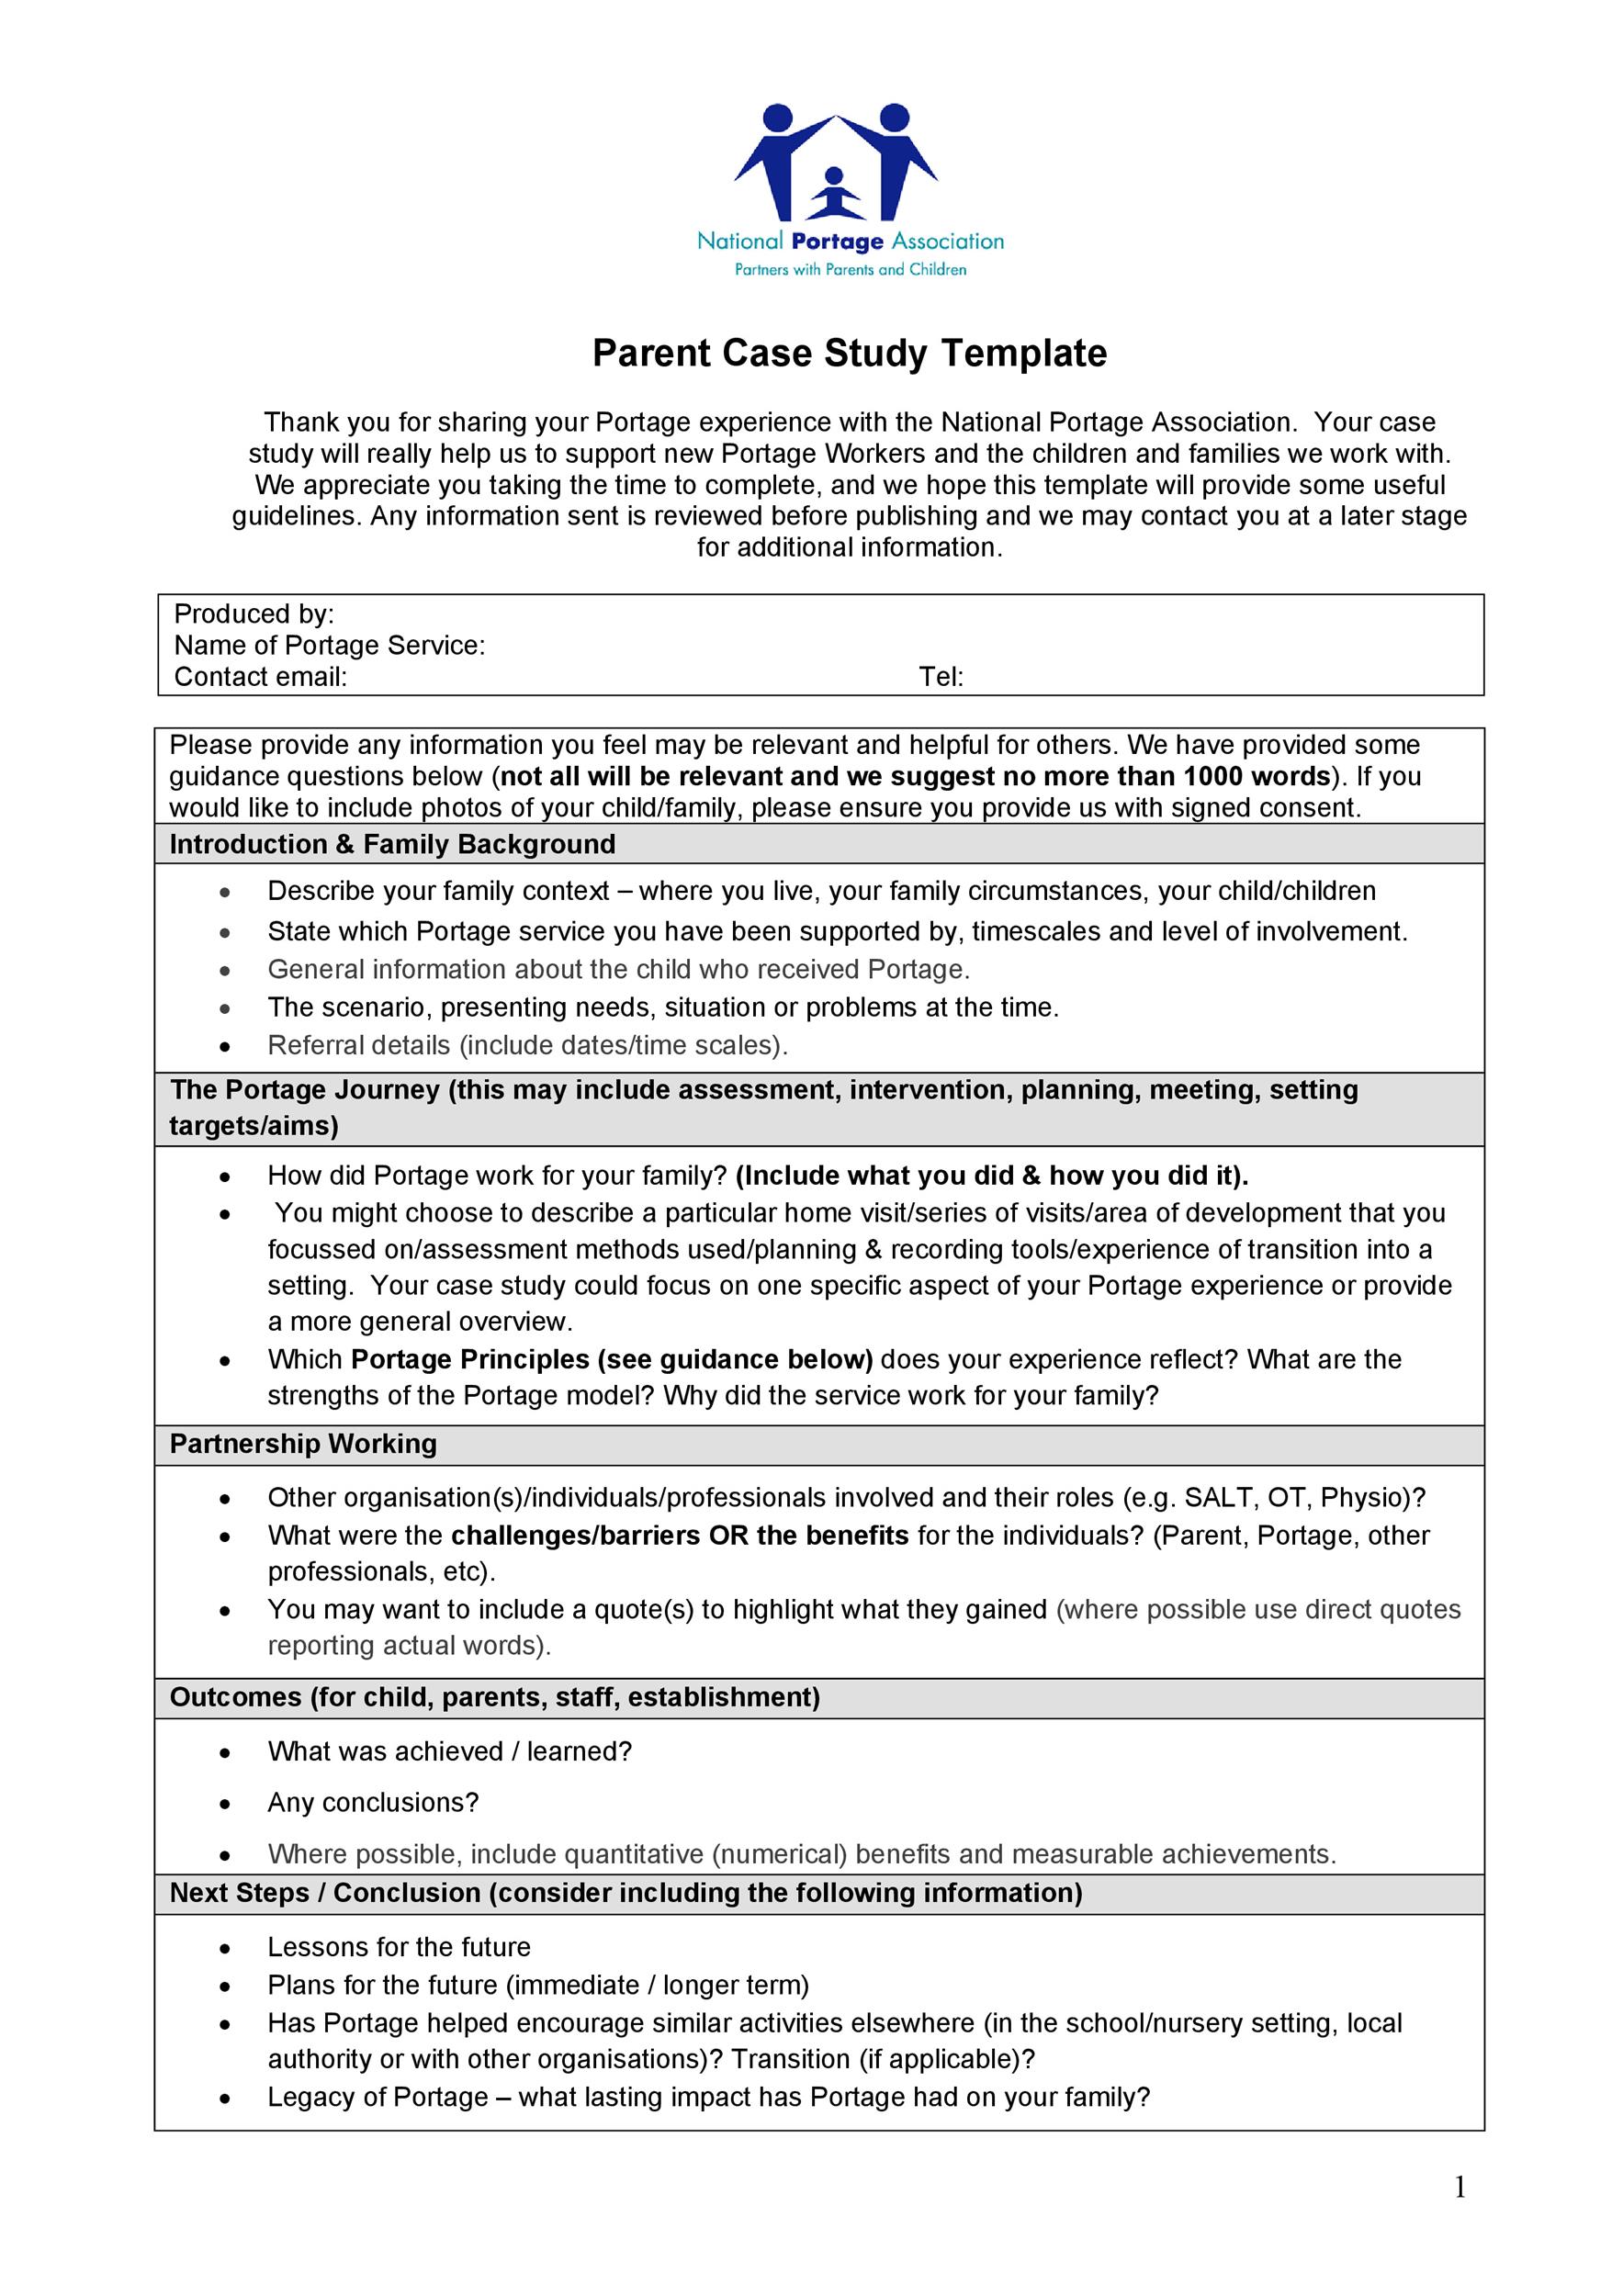 sample case study report in education template